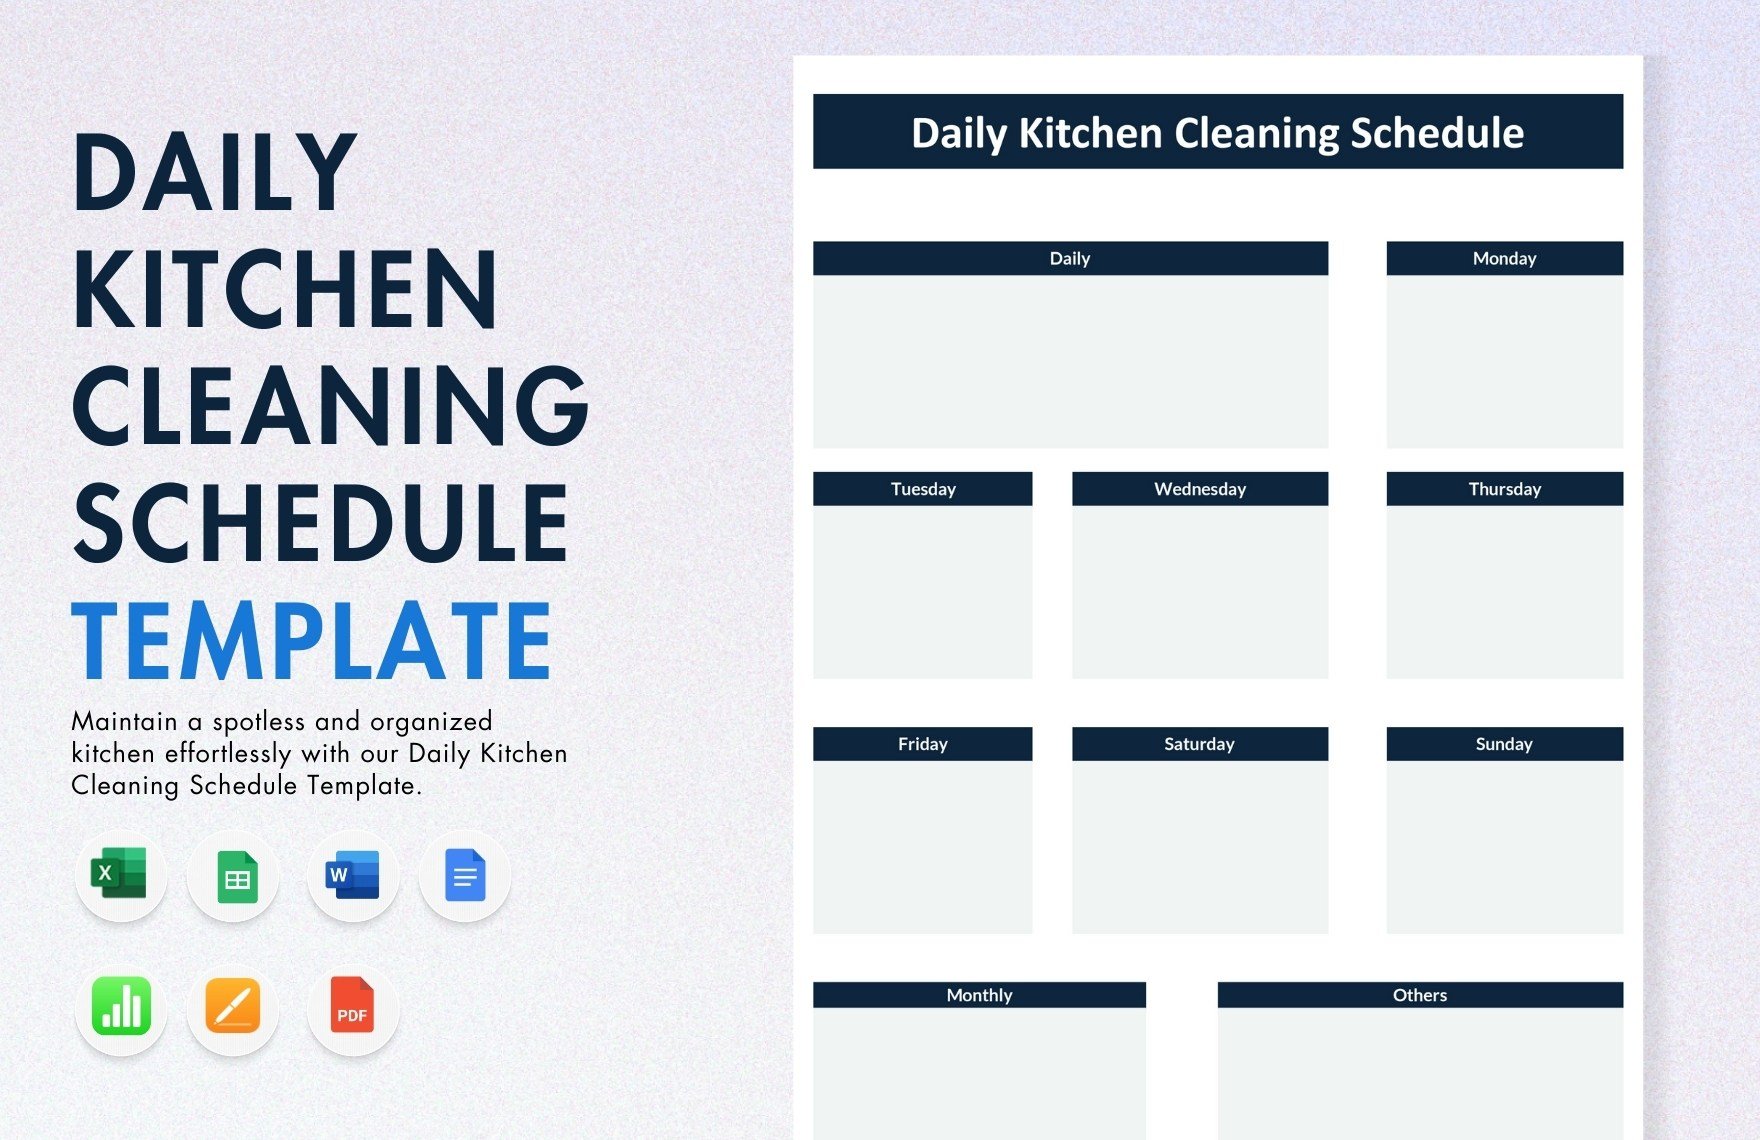 Daily Kitchen Cleaning Schedule Template in Word, Google Docs, Excel, PDF, Google Sheets, Apple Pages, Apple Numbers